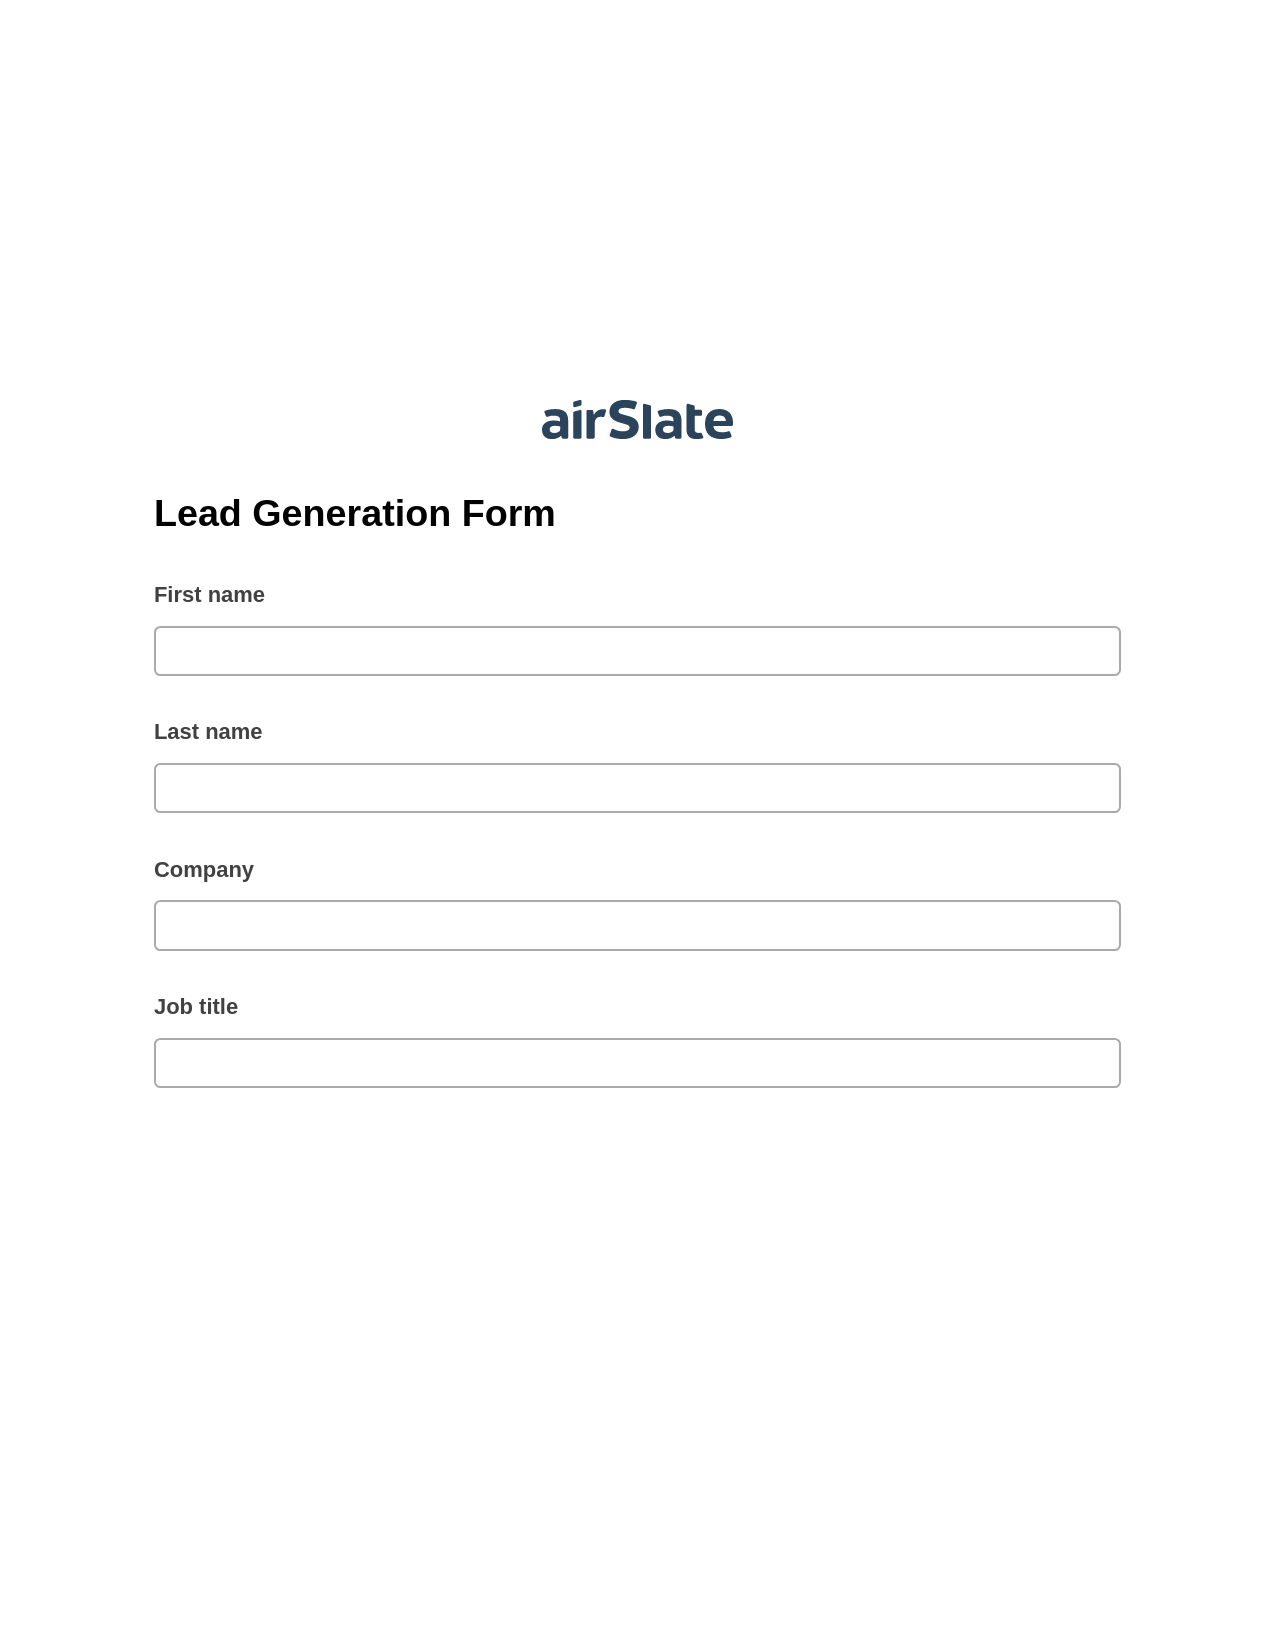 Lead Generation Form Pre-fill from CSV File Bot, Hide Signatures Bot, Post-finish Document Bot